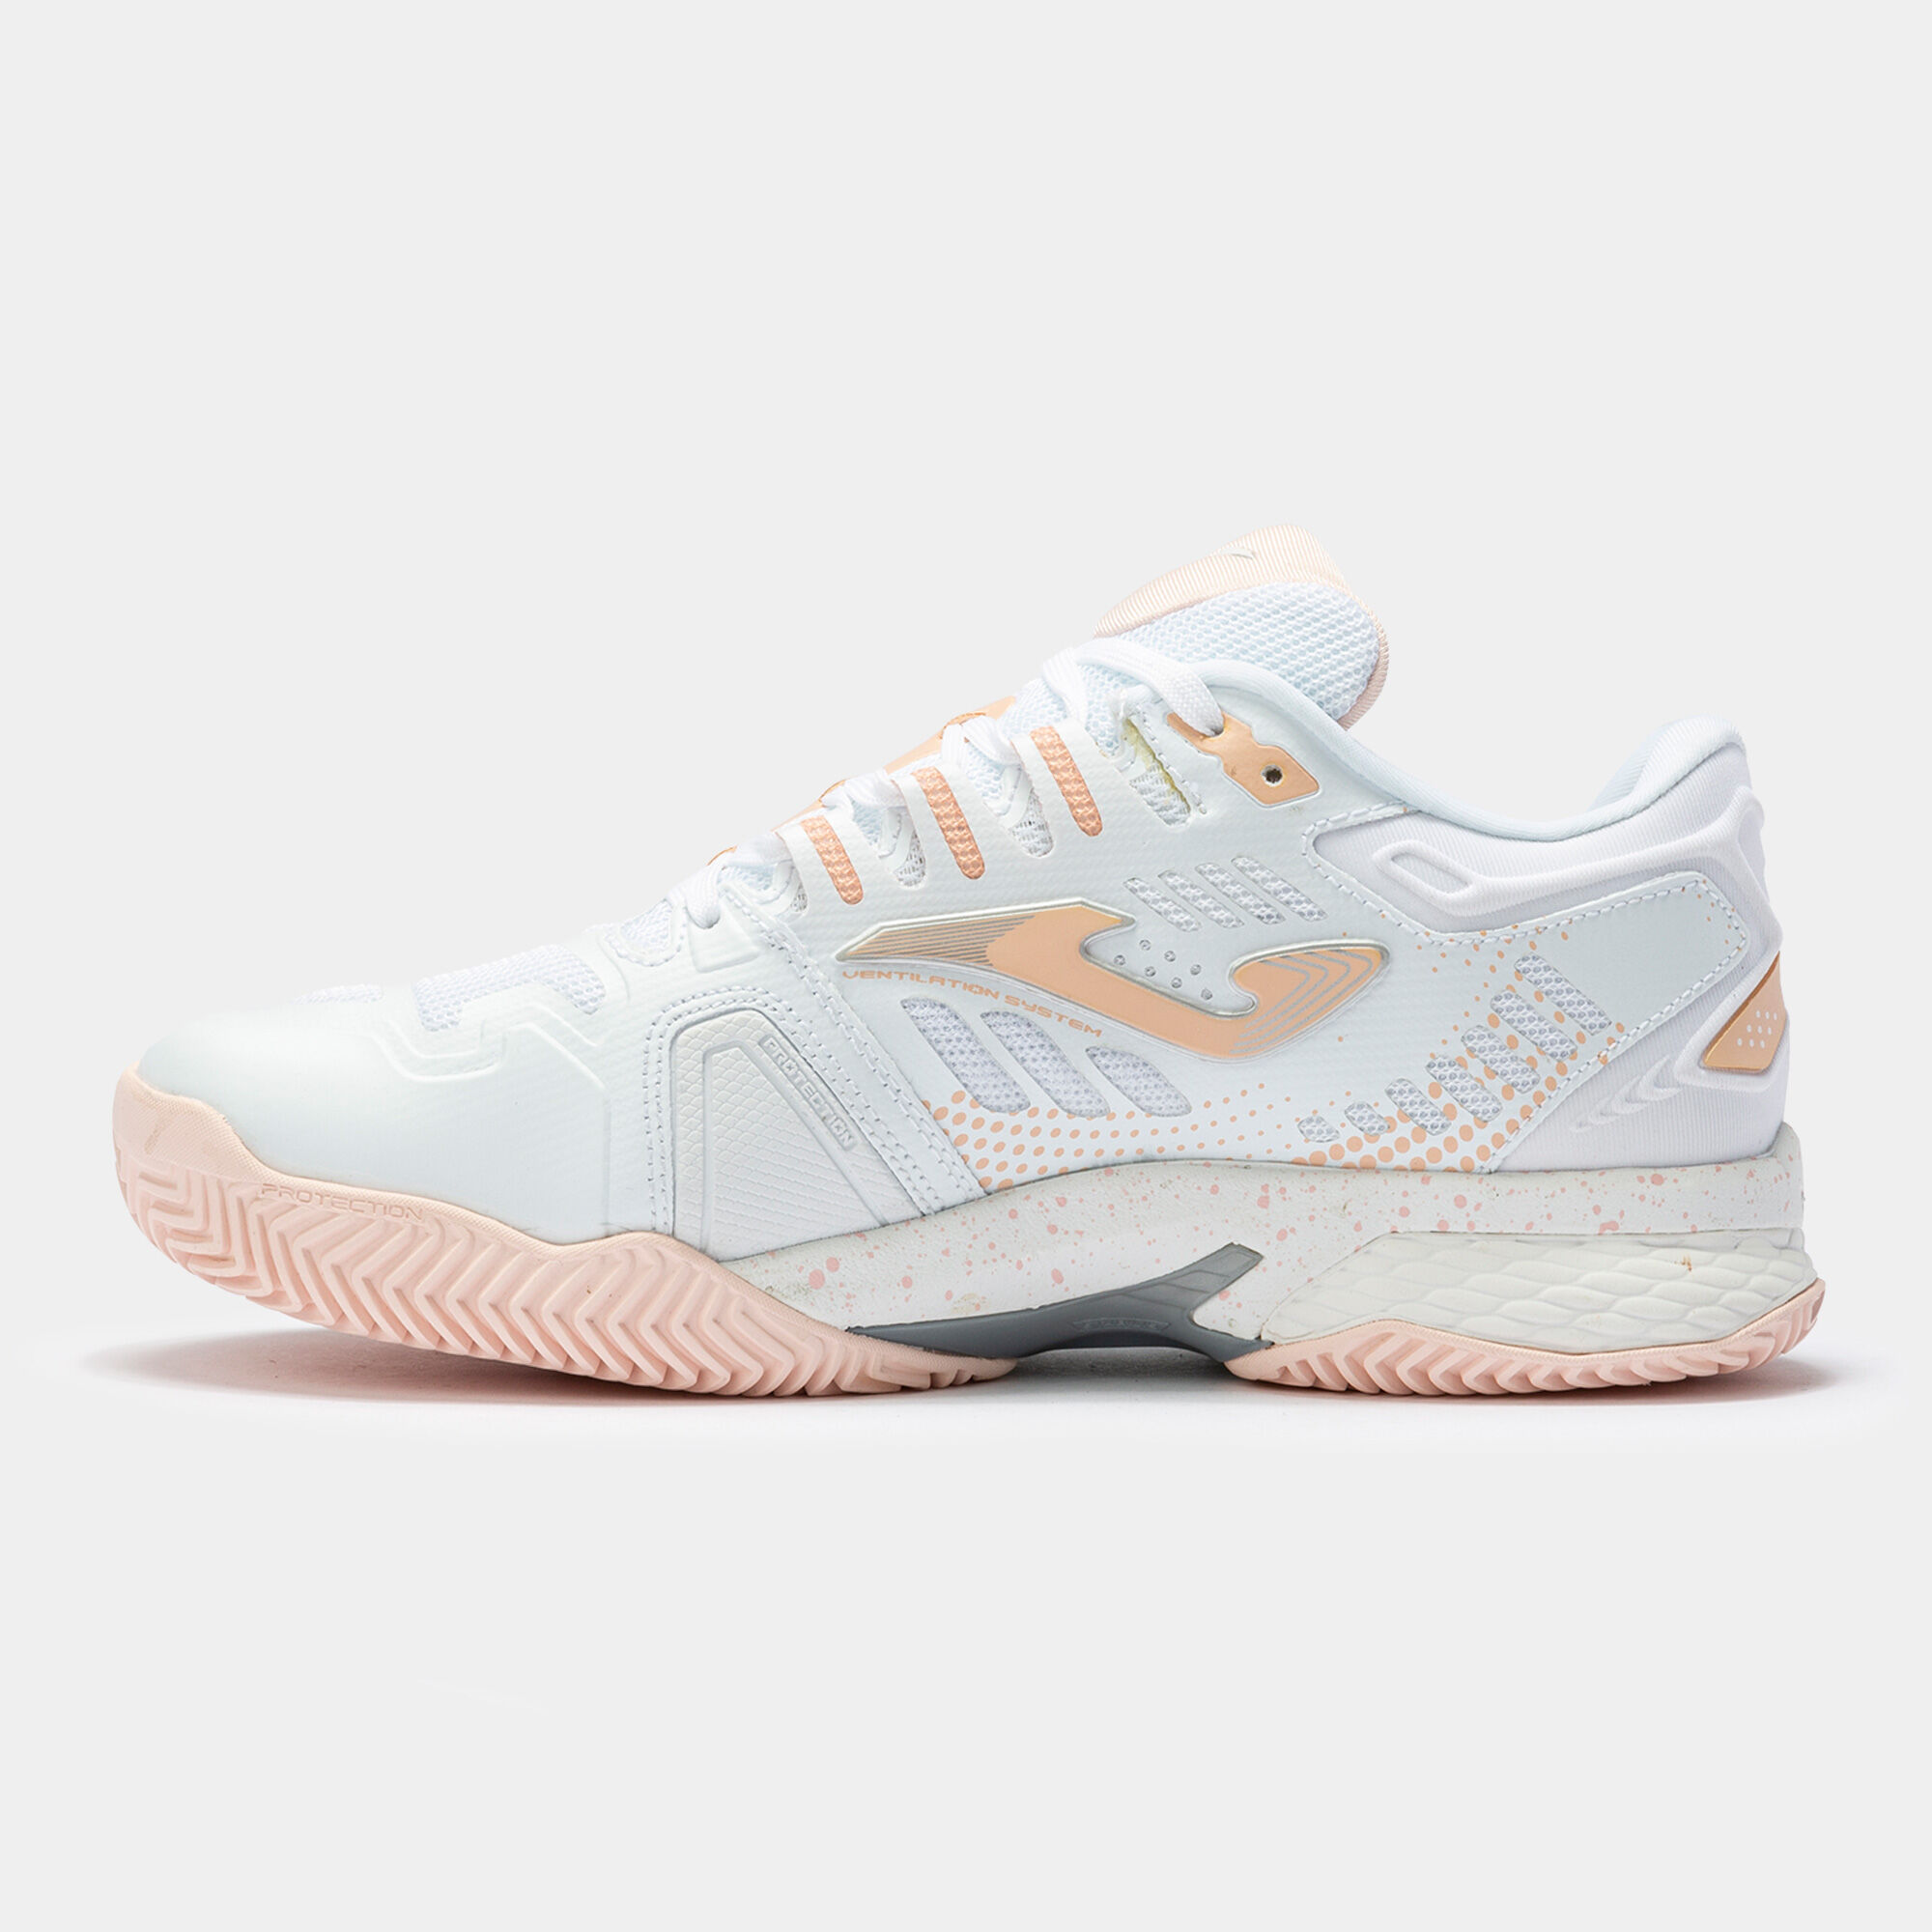 SHOES SLAM 22 CLAY WOMAN WHITE LIGHT PINK